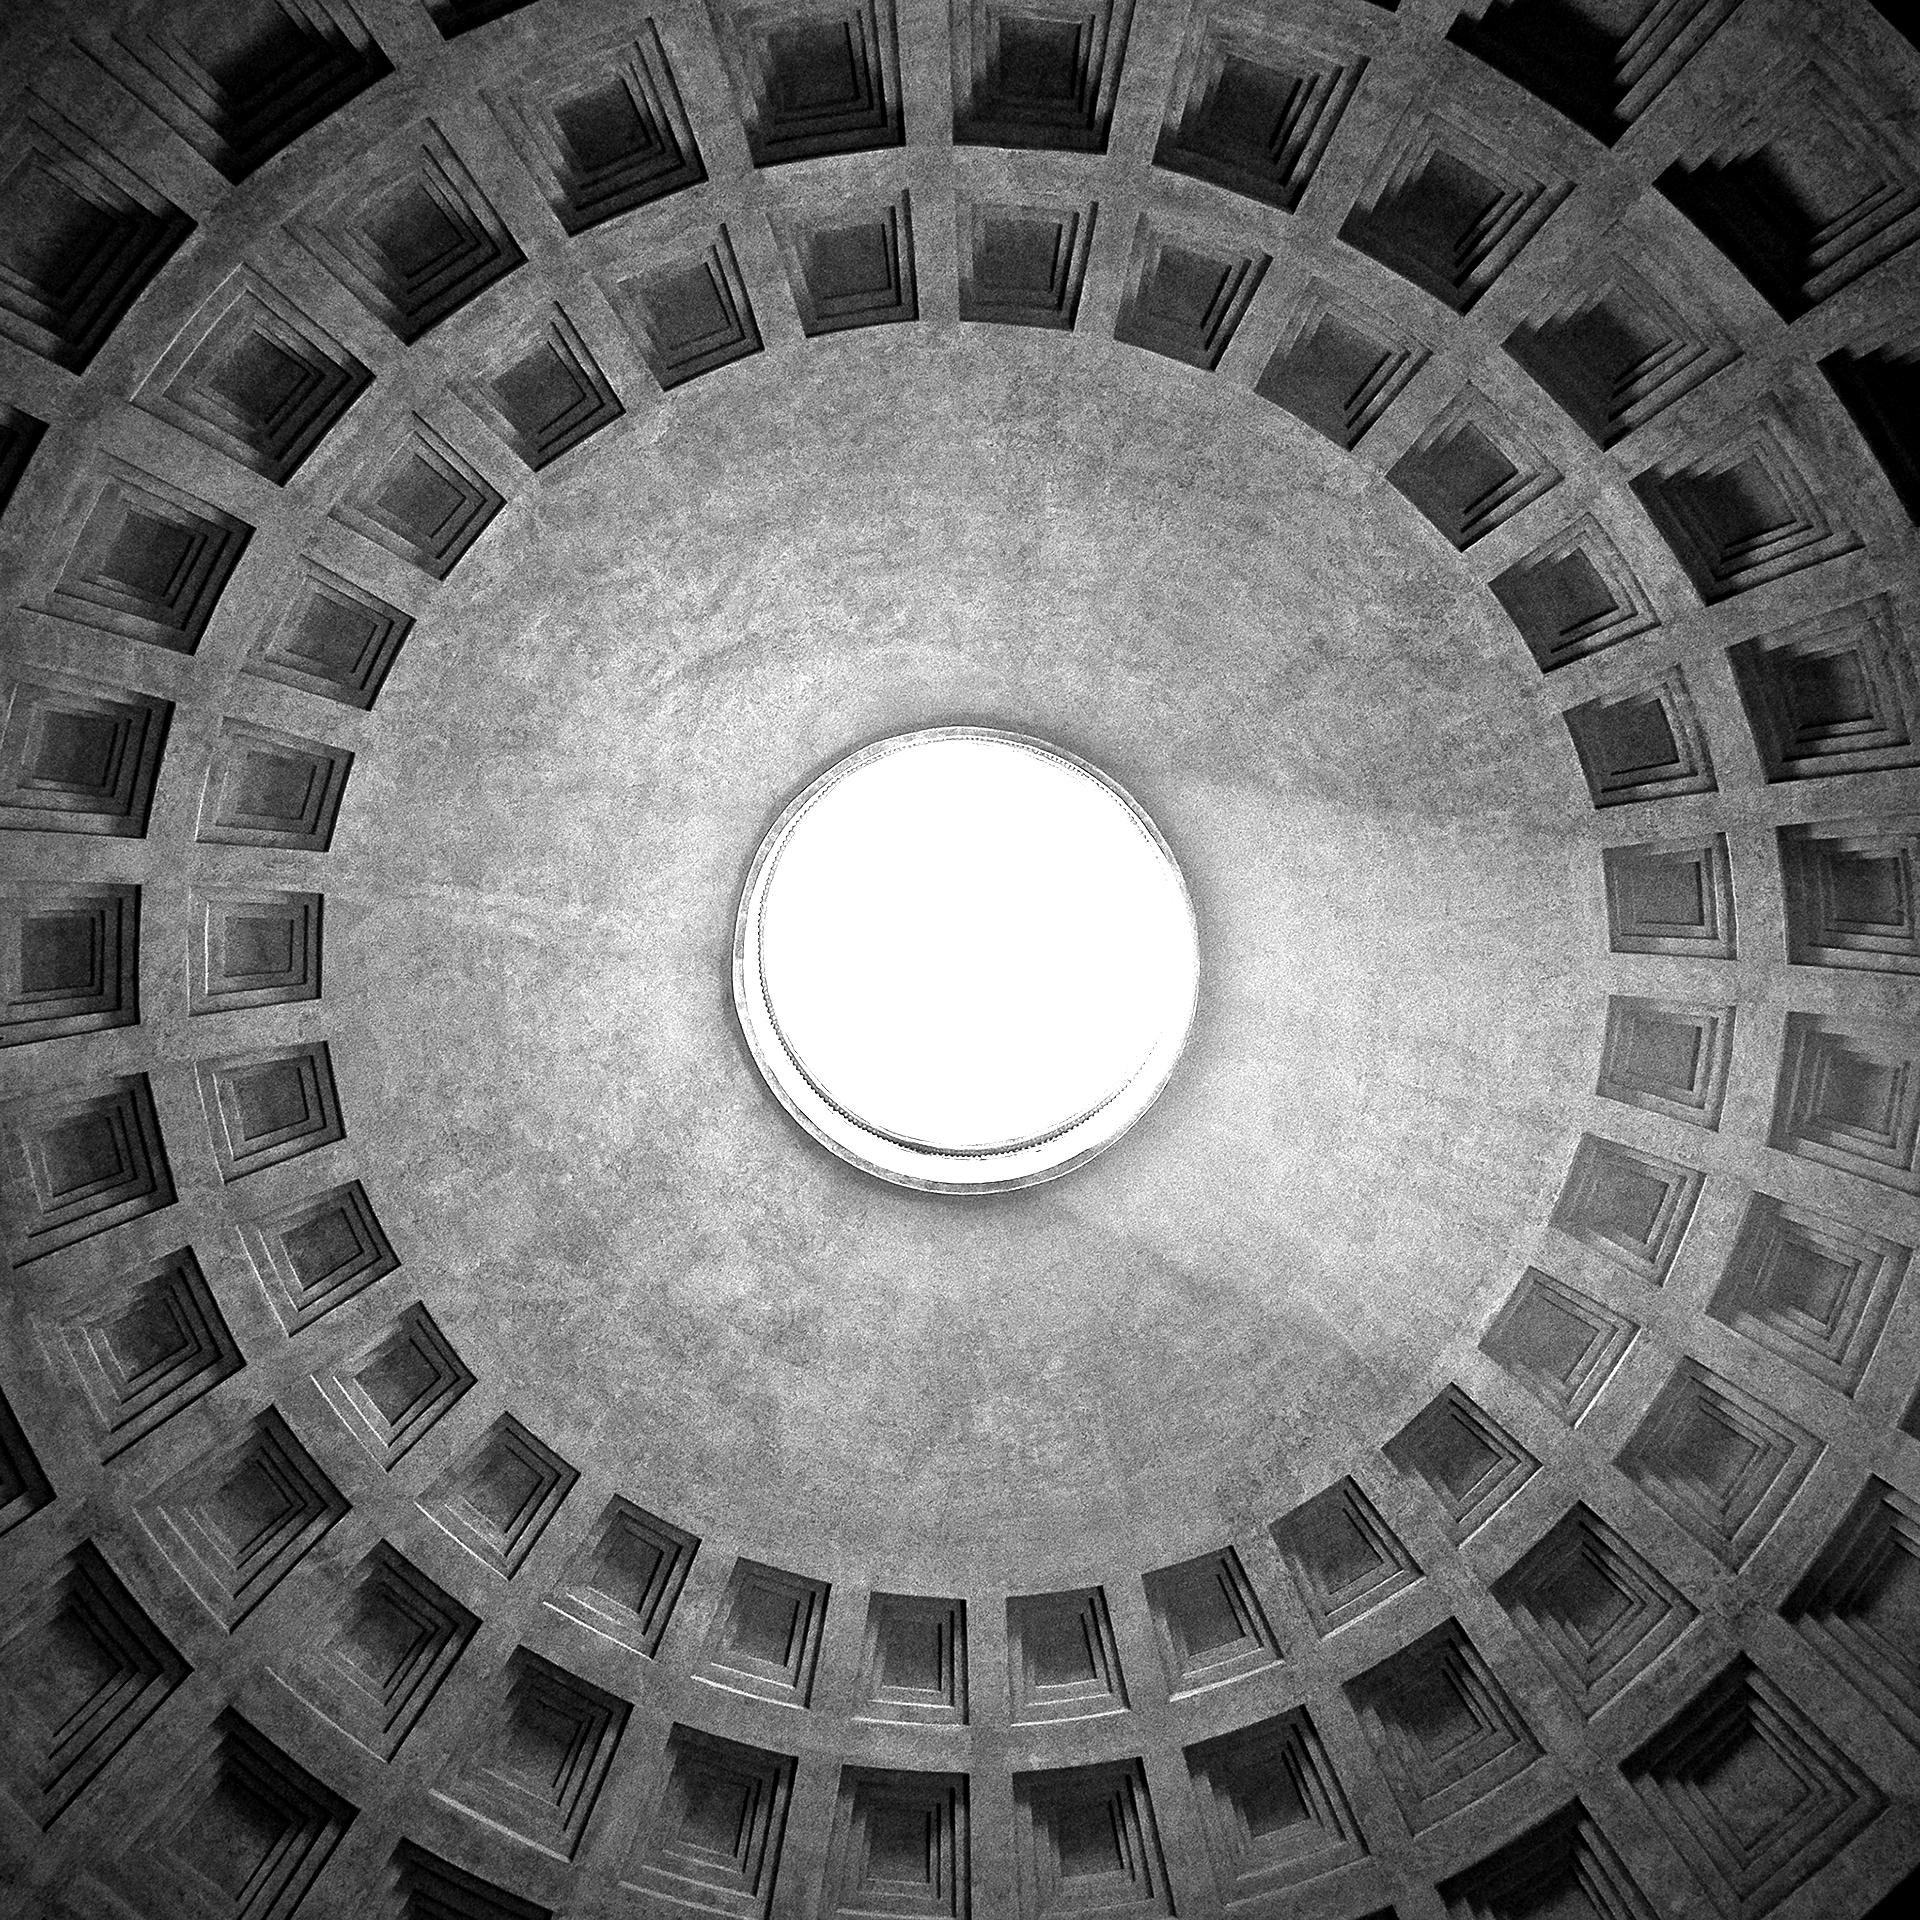 AMAZING PANTHEON COMPOSITION - n° 6 prints 50x50 cm. with frame
Collection: 